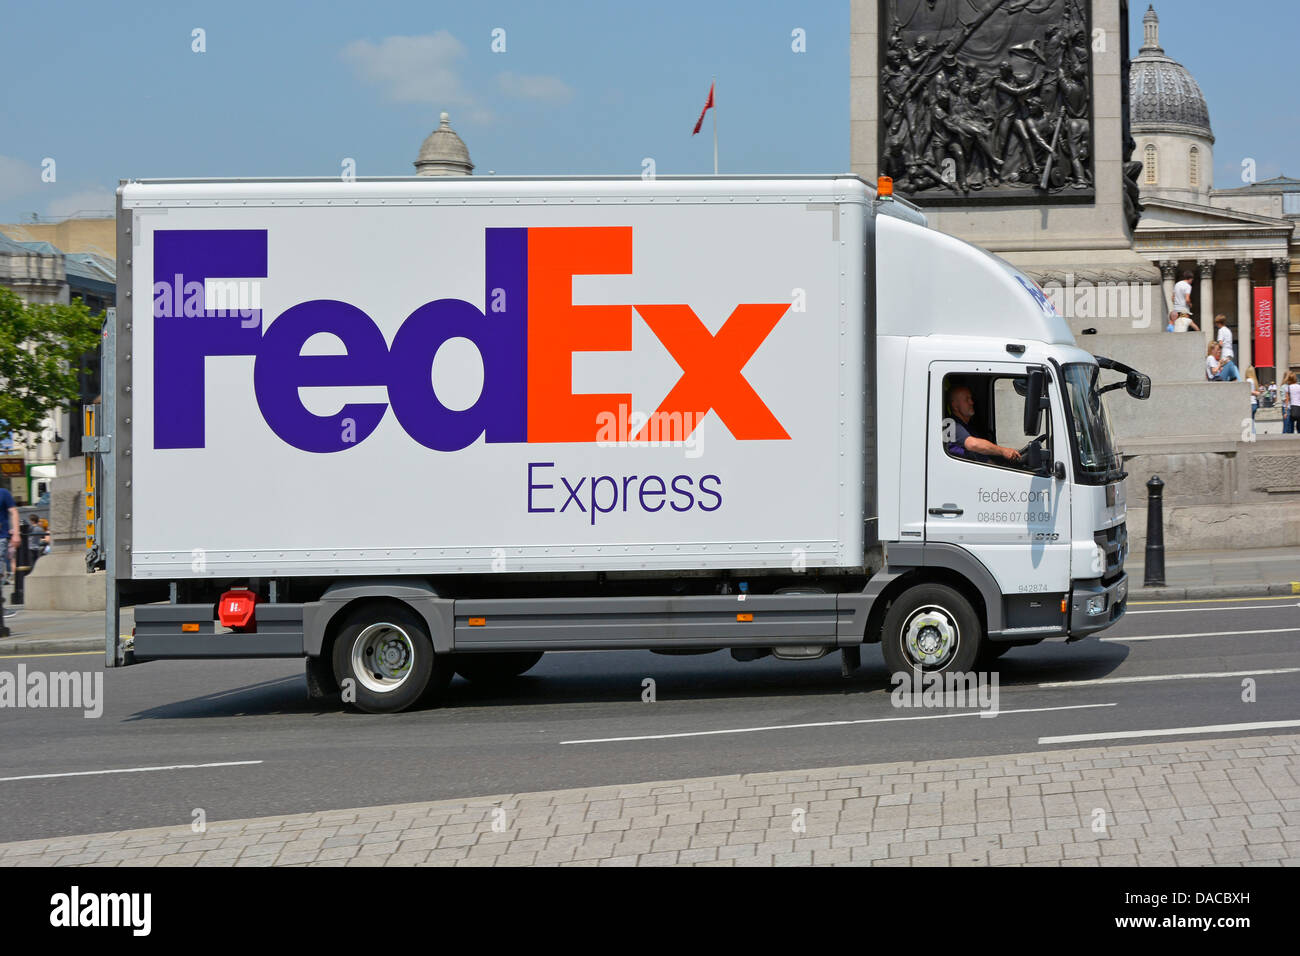 FedEx Express white delivery lorry truck side view of business logo branding and driver in Trafalgar Square  London England UK Stock Photo